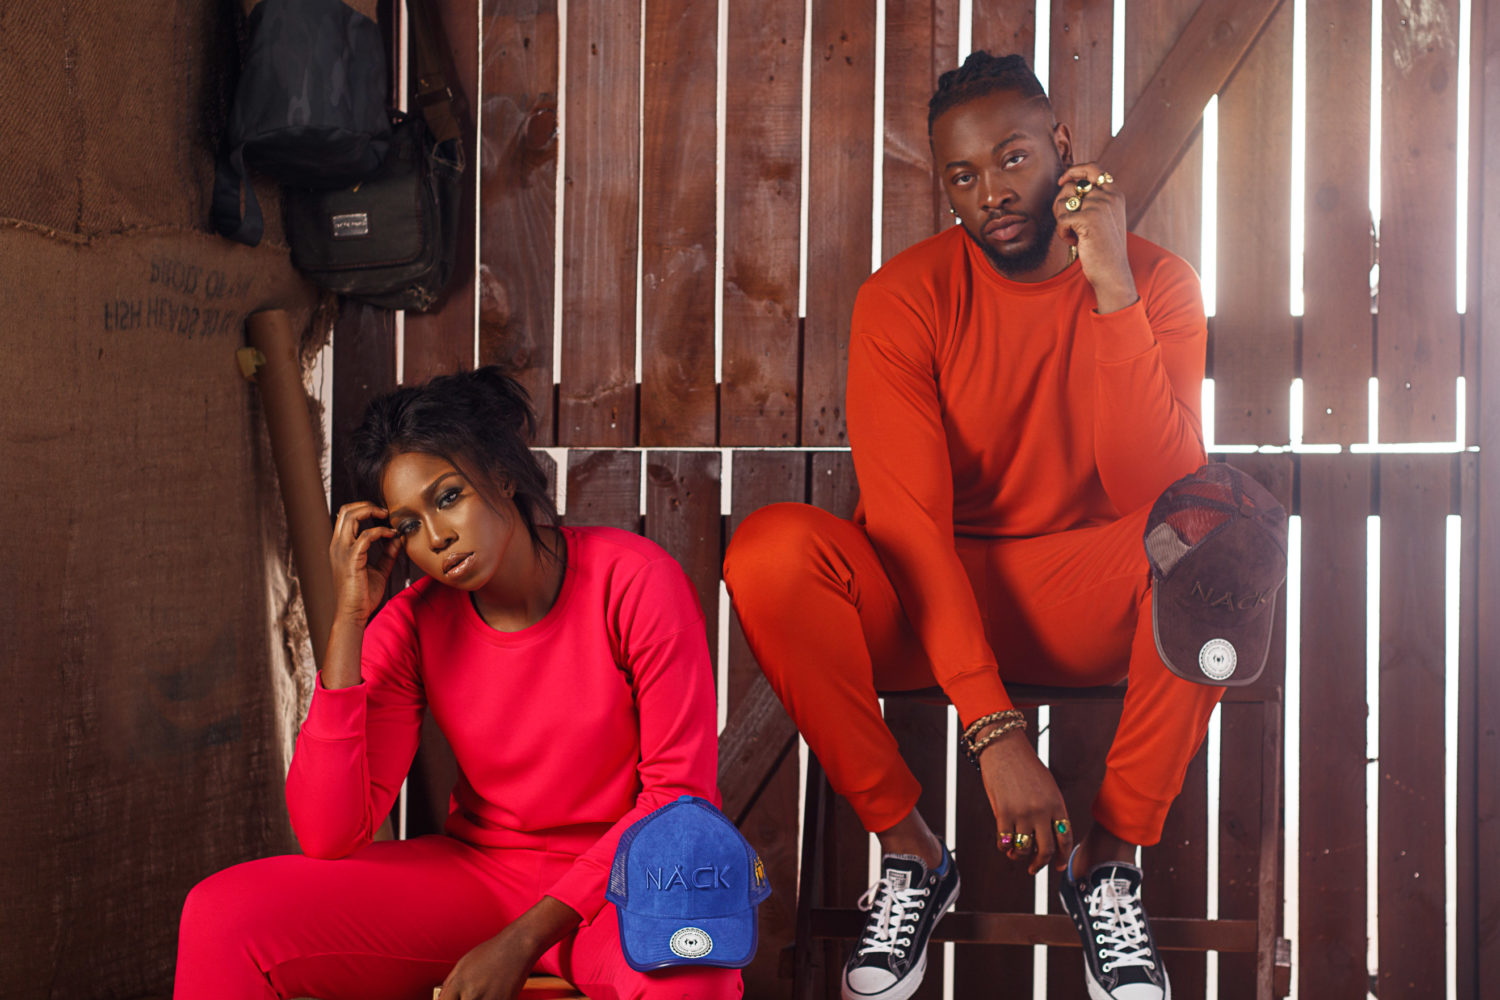 Big Brother Naija Star Teddy A and Nollywood Darling Lilian Afegbai Front NACK Apparel’s New ‘Interlude’ Collection